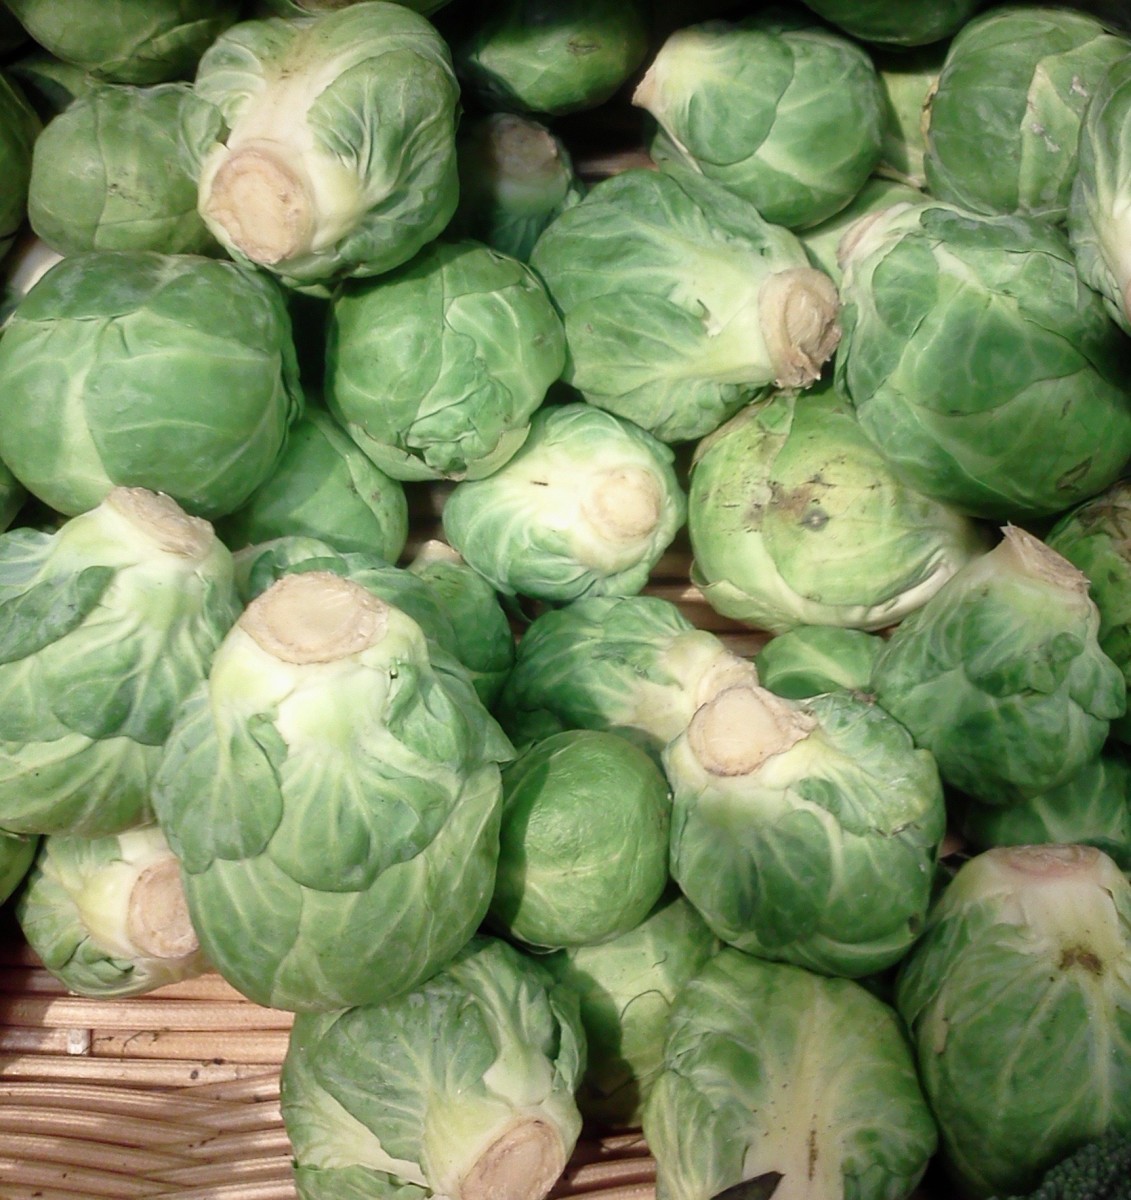 A basket of Brussels sprouts ready to cook